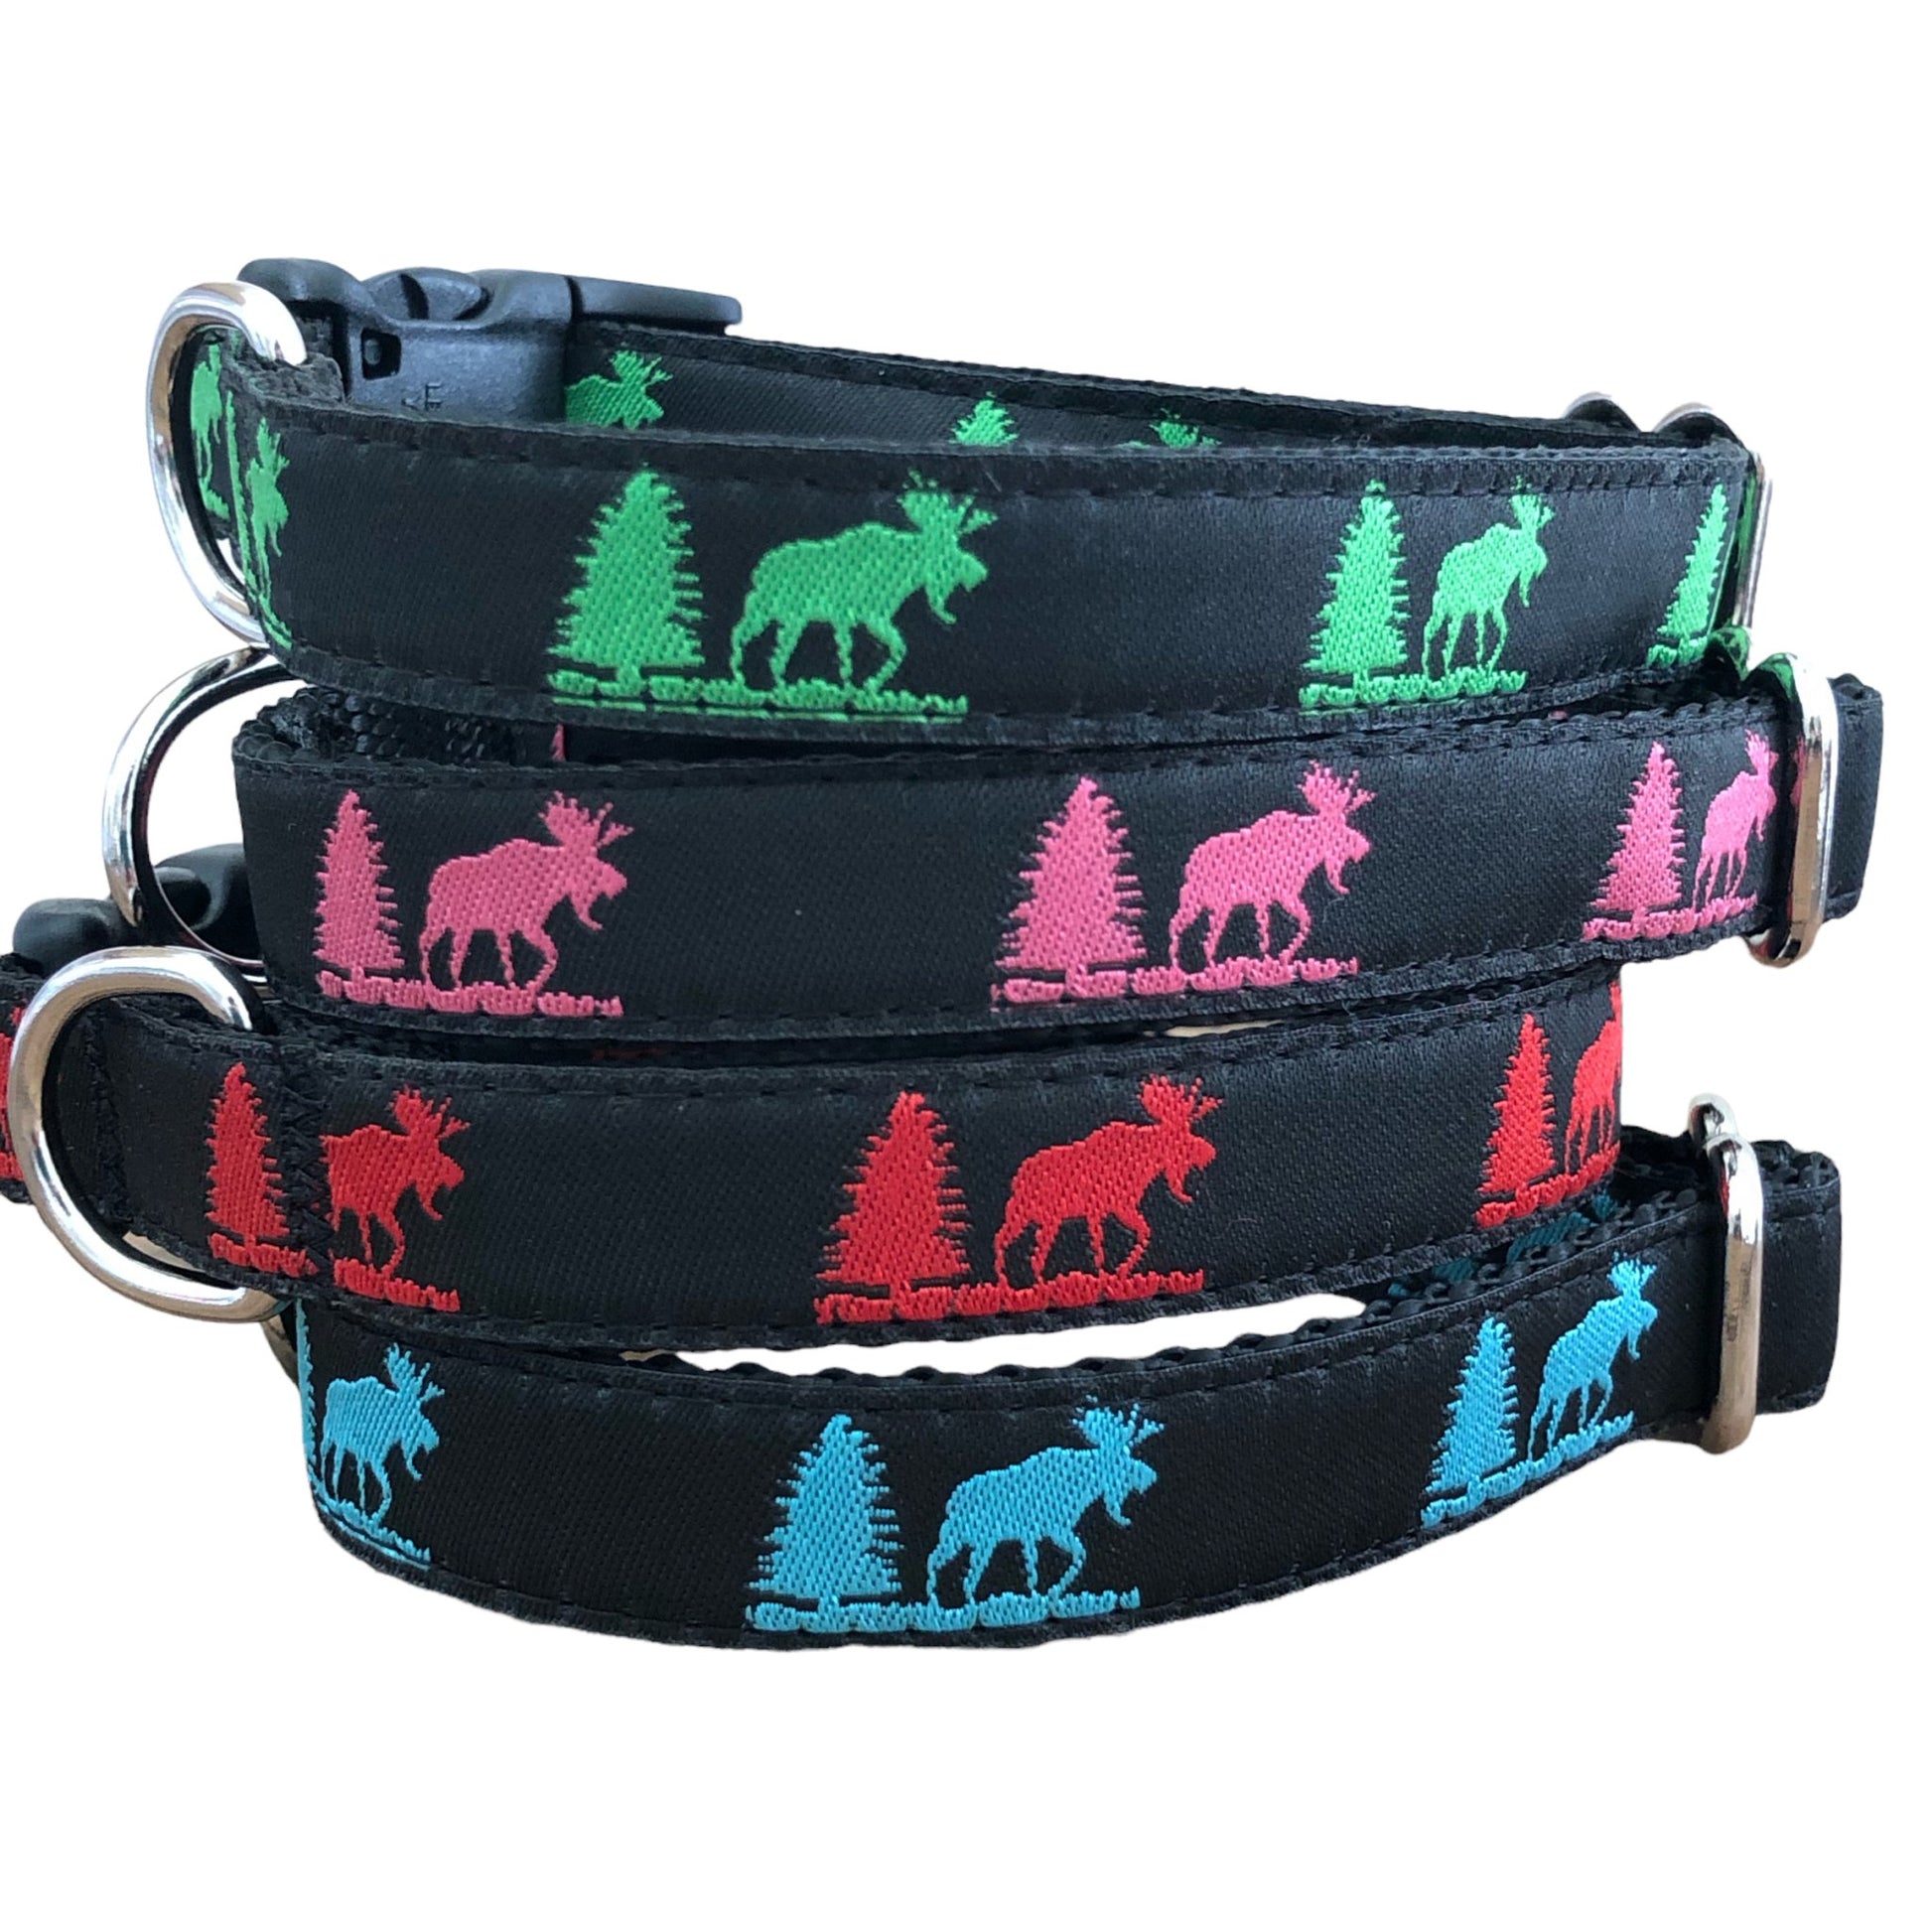 Sew Fetch Dog Co - Maine Moose Dog Collar and Leashes, Black With Colored Moose - Happy Hounds Pet Supply